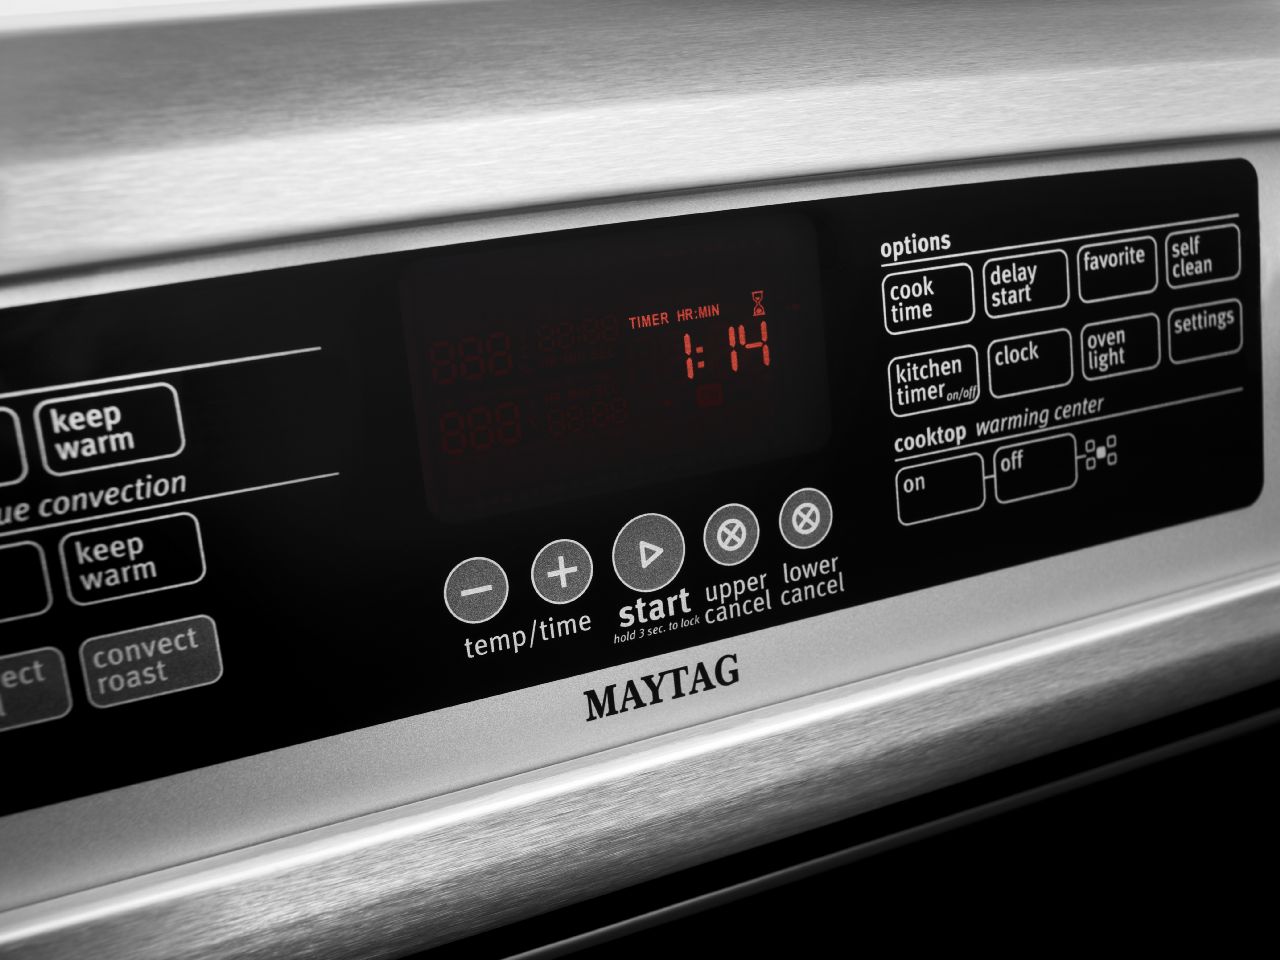 How To Fix The Error Code F8-E3 For Maytag Oven